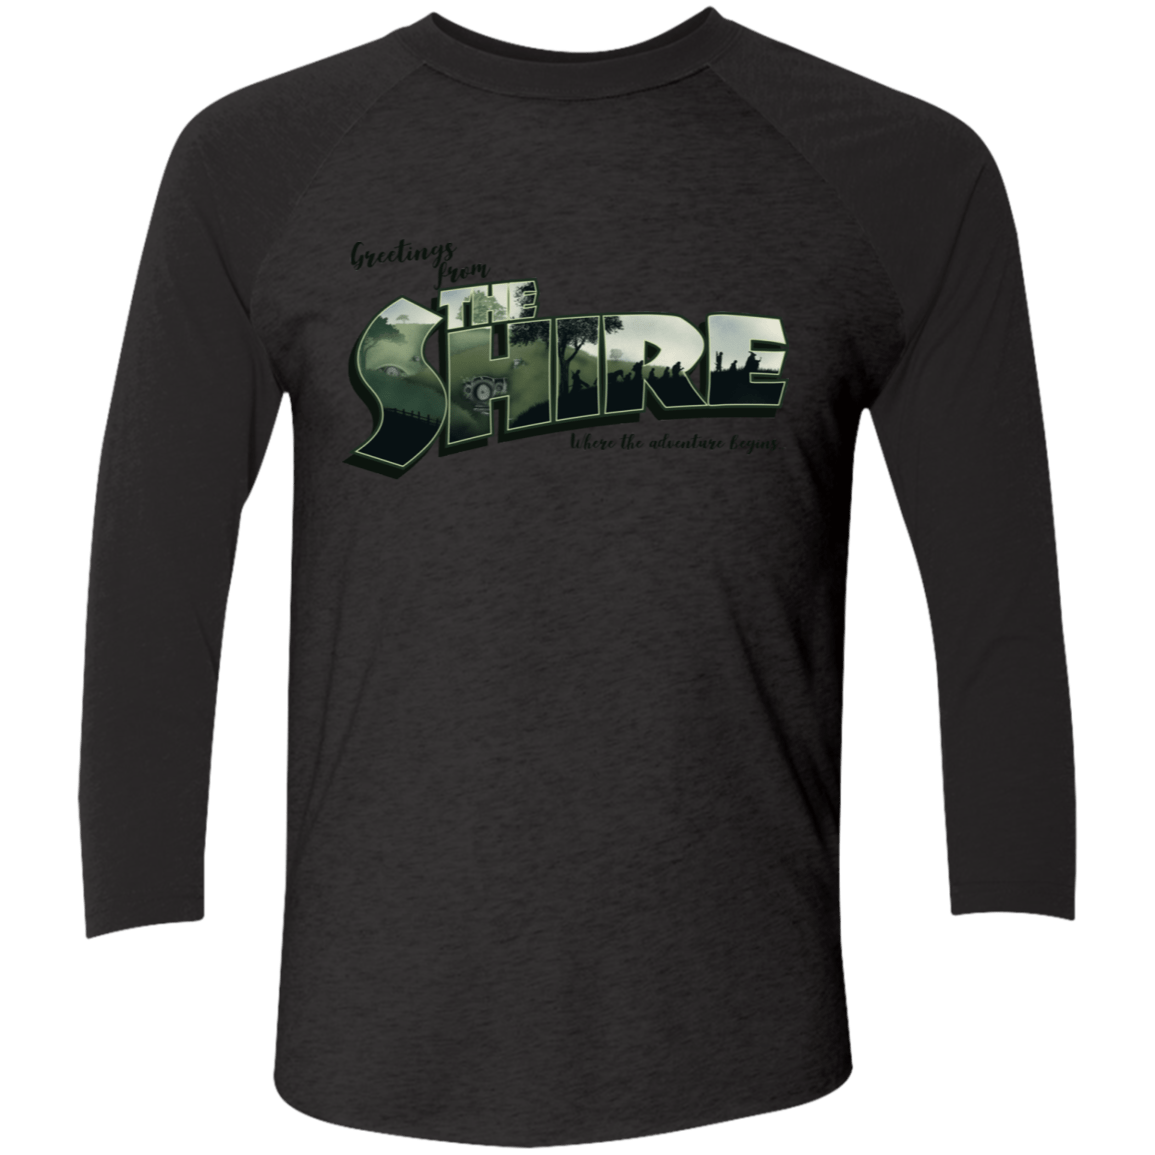 T-Shirts Vintage Black/Vintage Black / X-Small Greetings from the Shire Men's Triblend 3/4 Sleeve